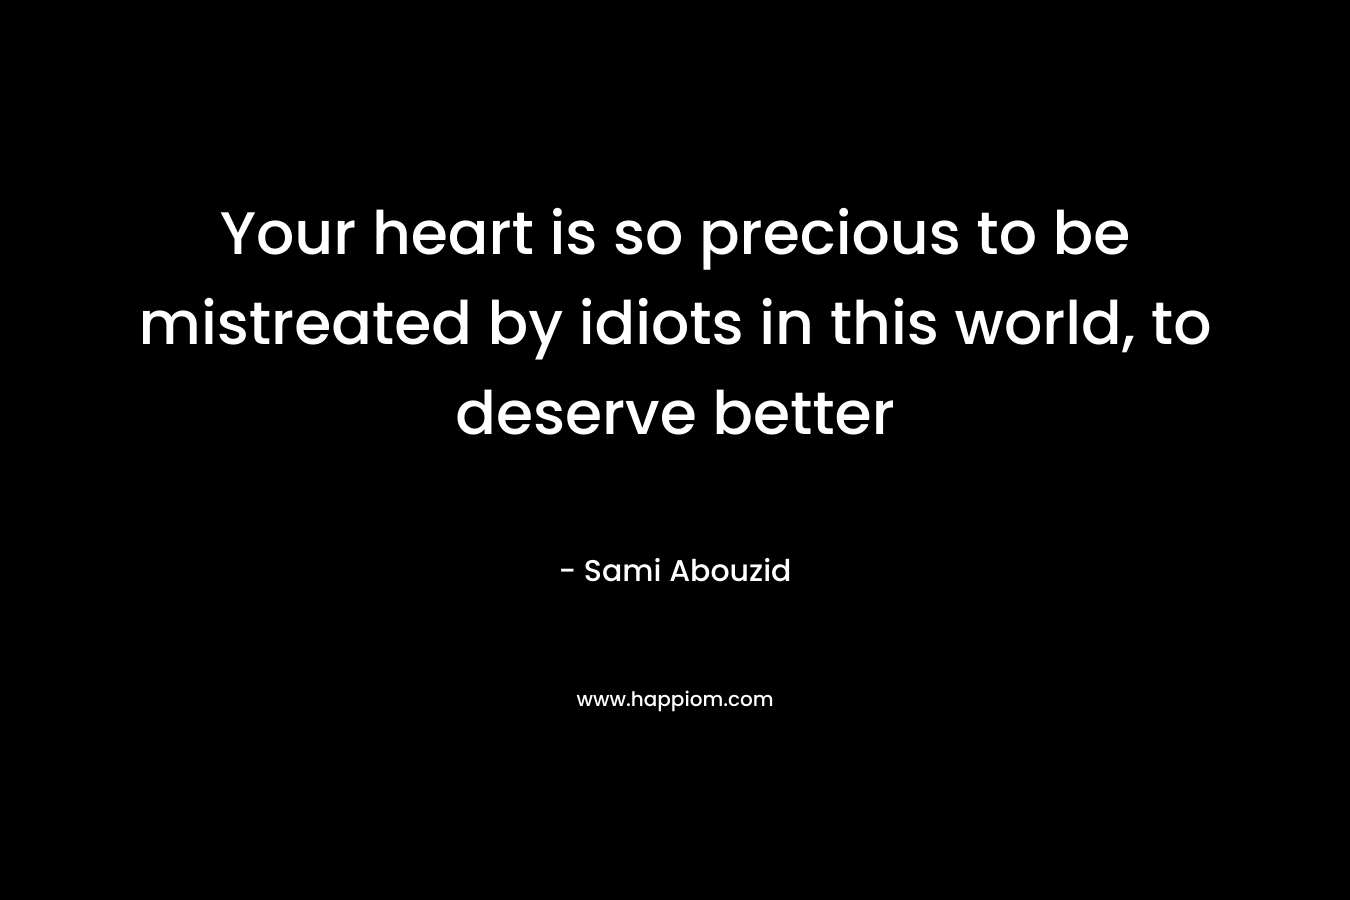 Your heart is so precious to be mistreated by idiots in this world, to deserve better